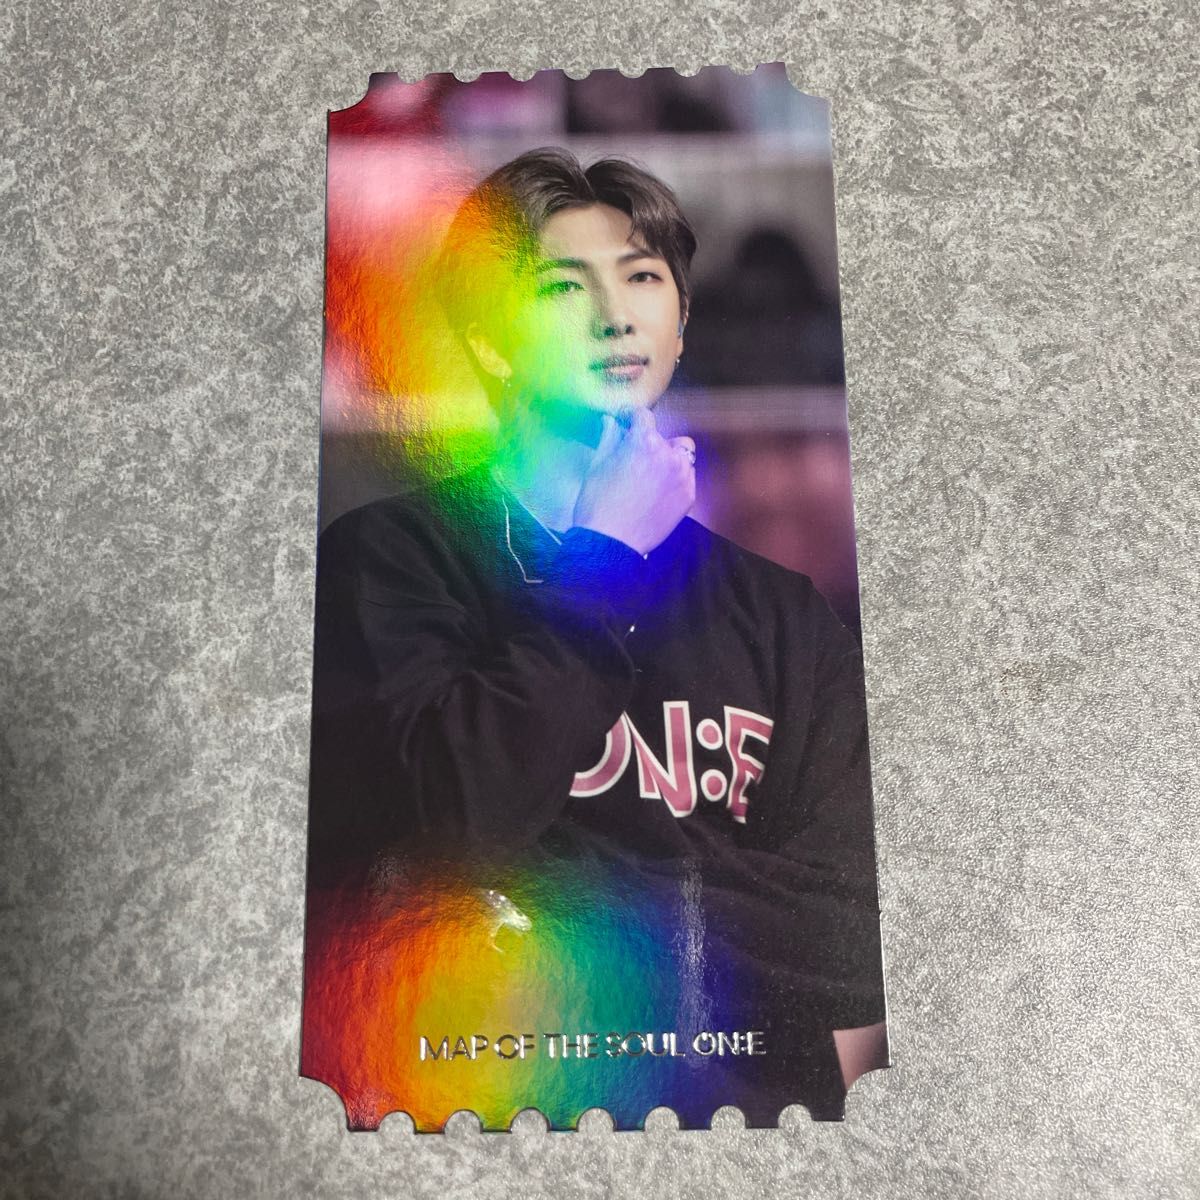 BTS RM  Love Yourself & Map of Soul One カード二枚組